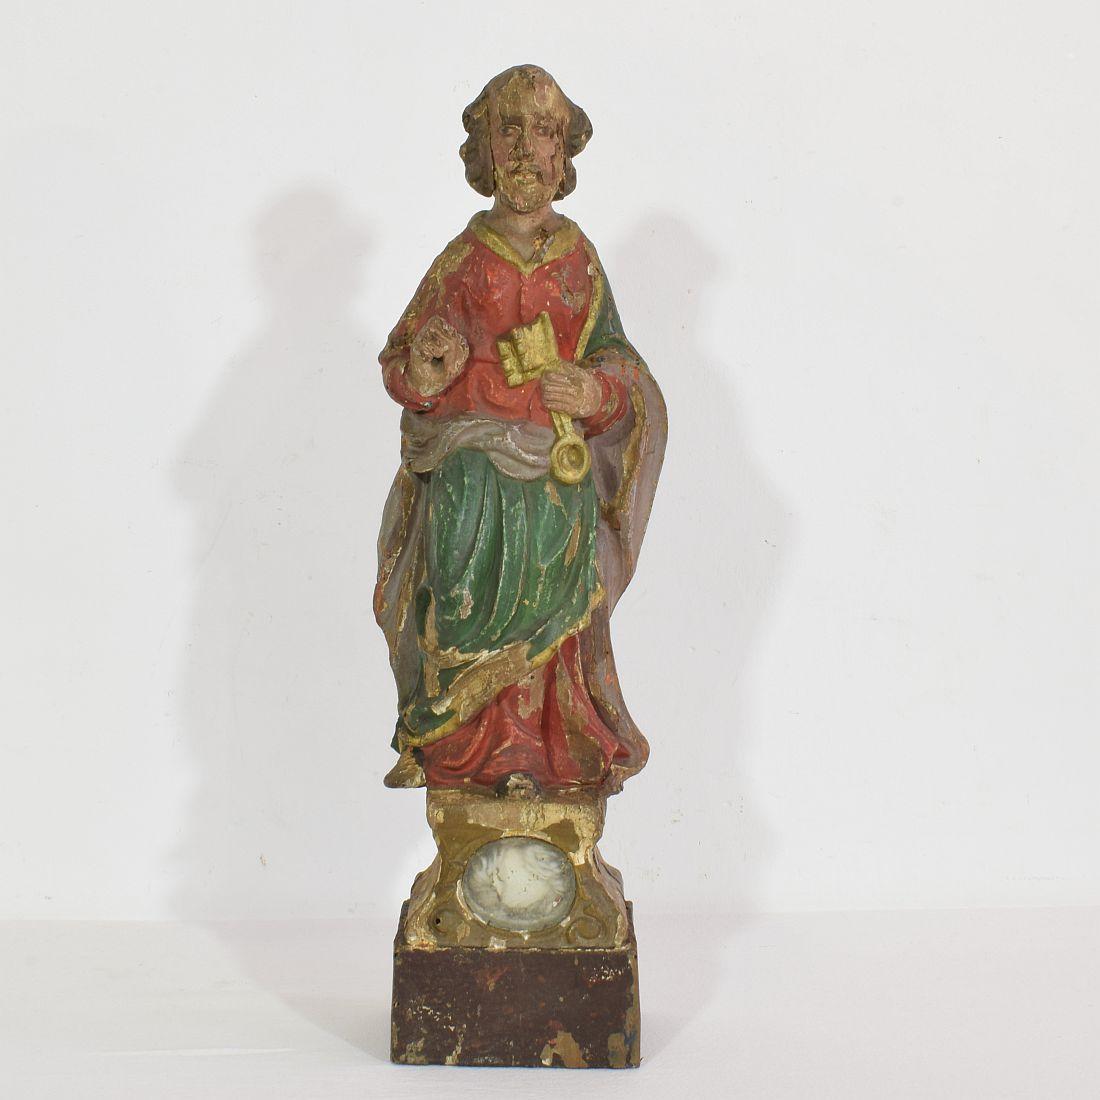 Unique hand carved saint peter with beautiful expression and small relique.
France, circa 1650-1750
Weathered and small losses.